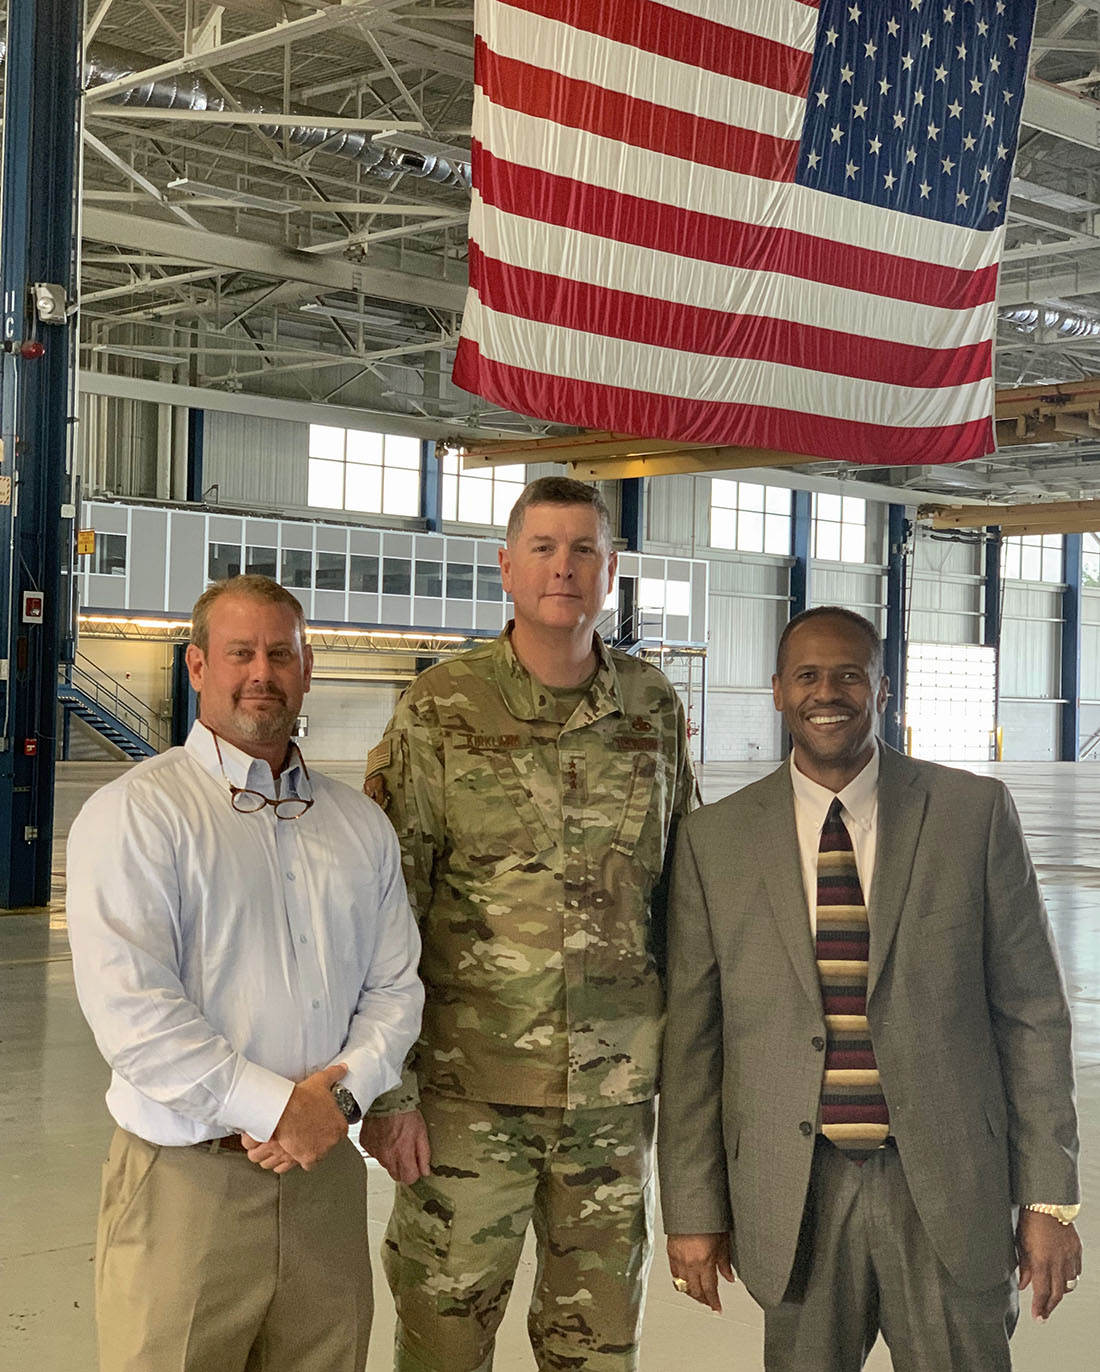 (Pictured left to right) Robbie Fountain, chairman of the Macon-Bibb County Industrial Authority, Lt. Gen. Donald E. “Gene” Kirkland, Commander, Air Force Sustainment Center (AFSC), Air Force Materiel Command, and Dr. Ivan H. Allen, president of Central Georgia Technical College. 